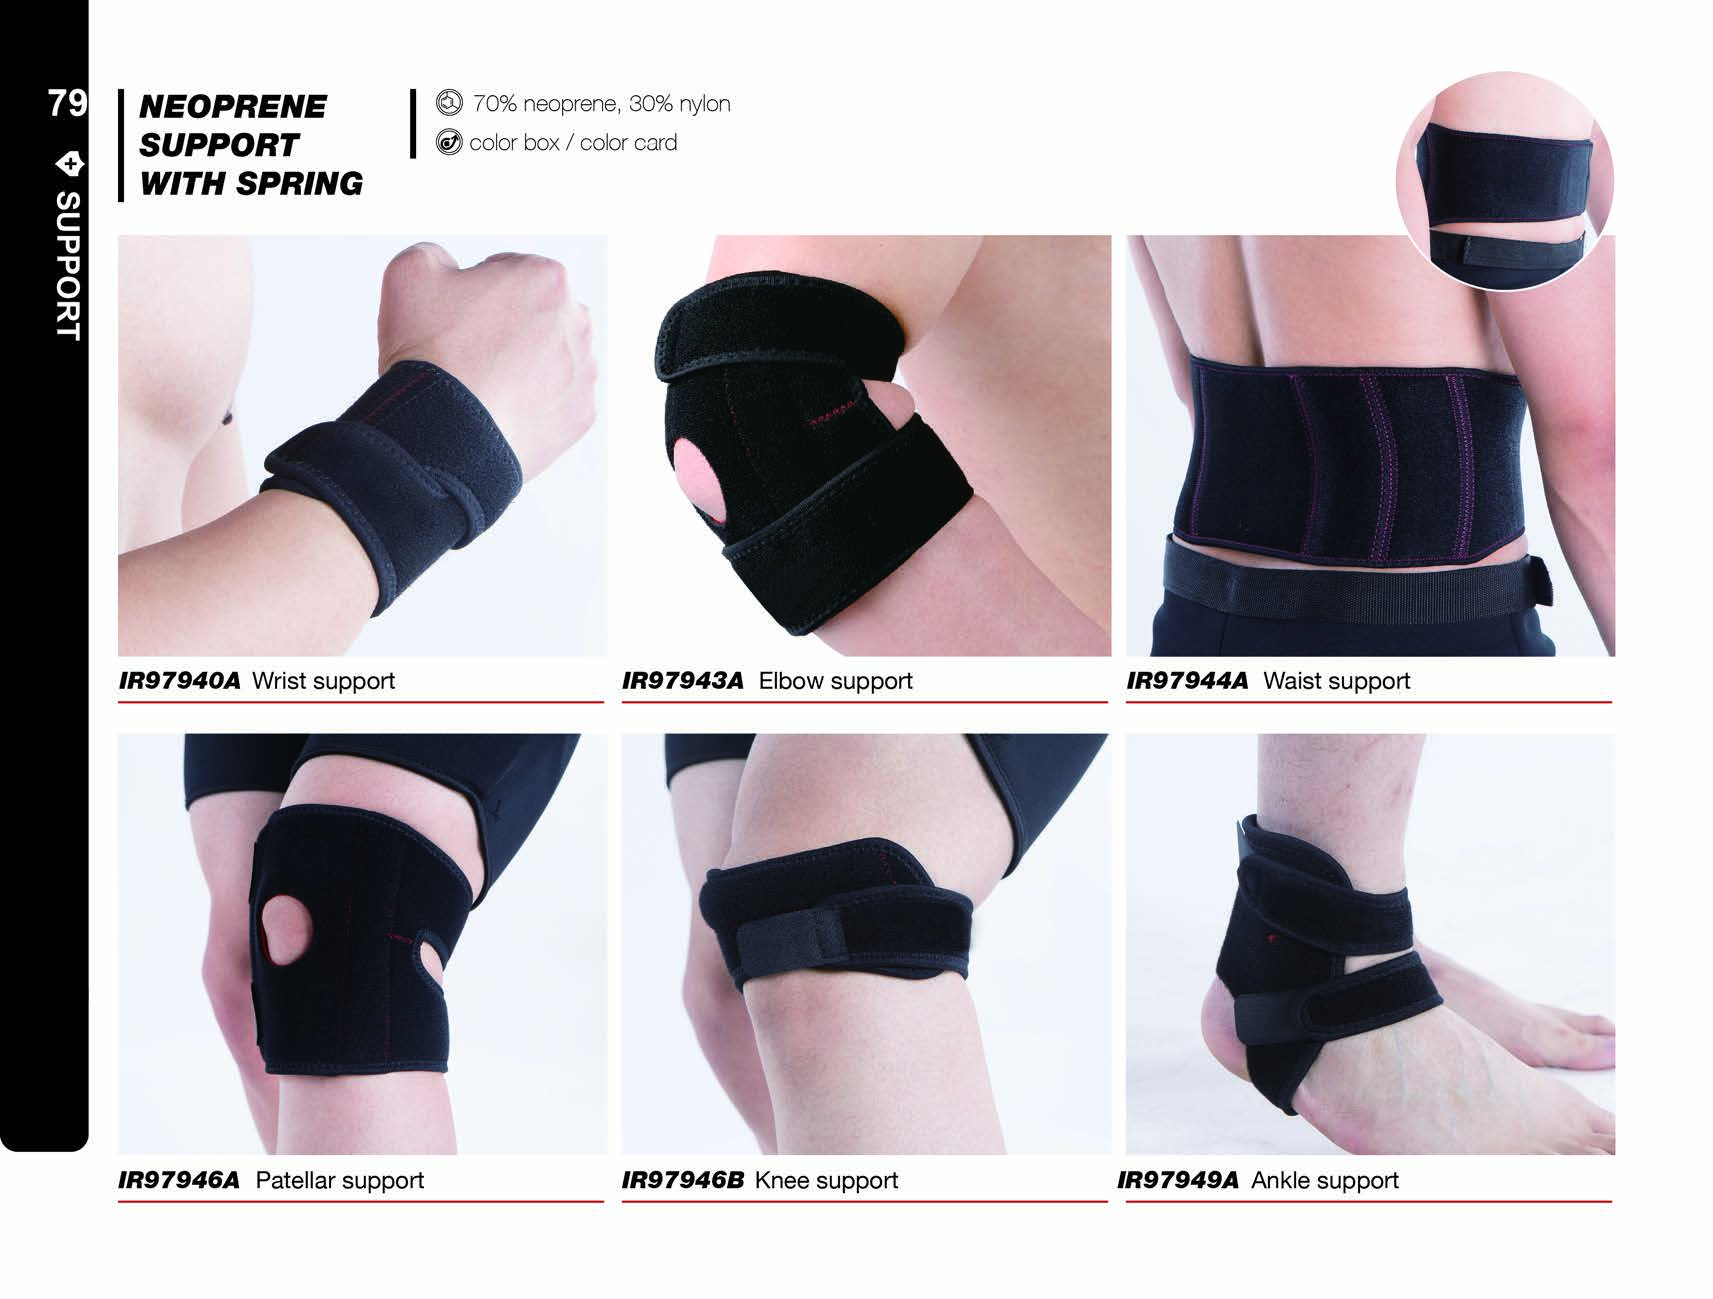 NEOPRENE SUPPORT WITH SPRING